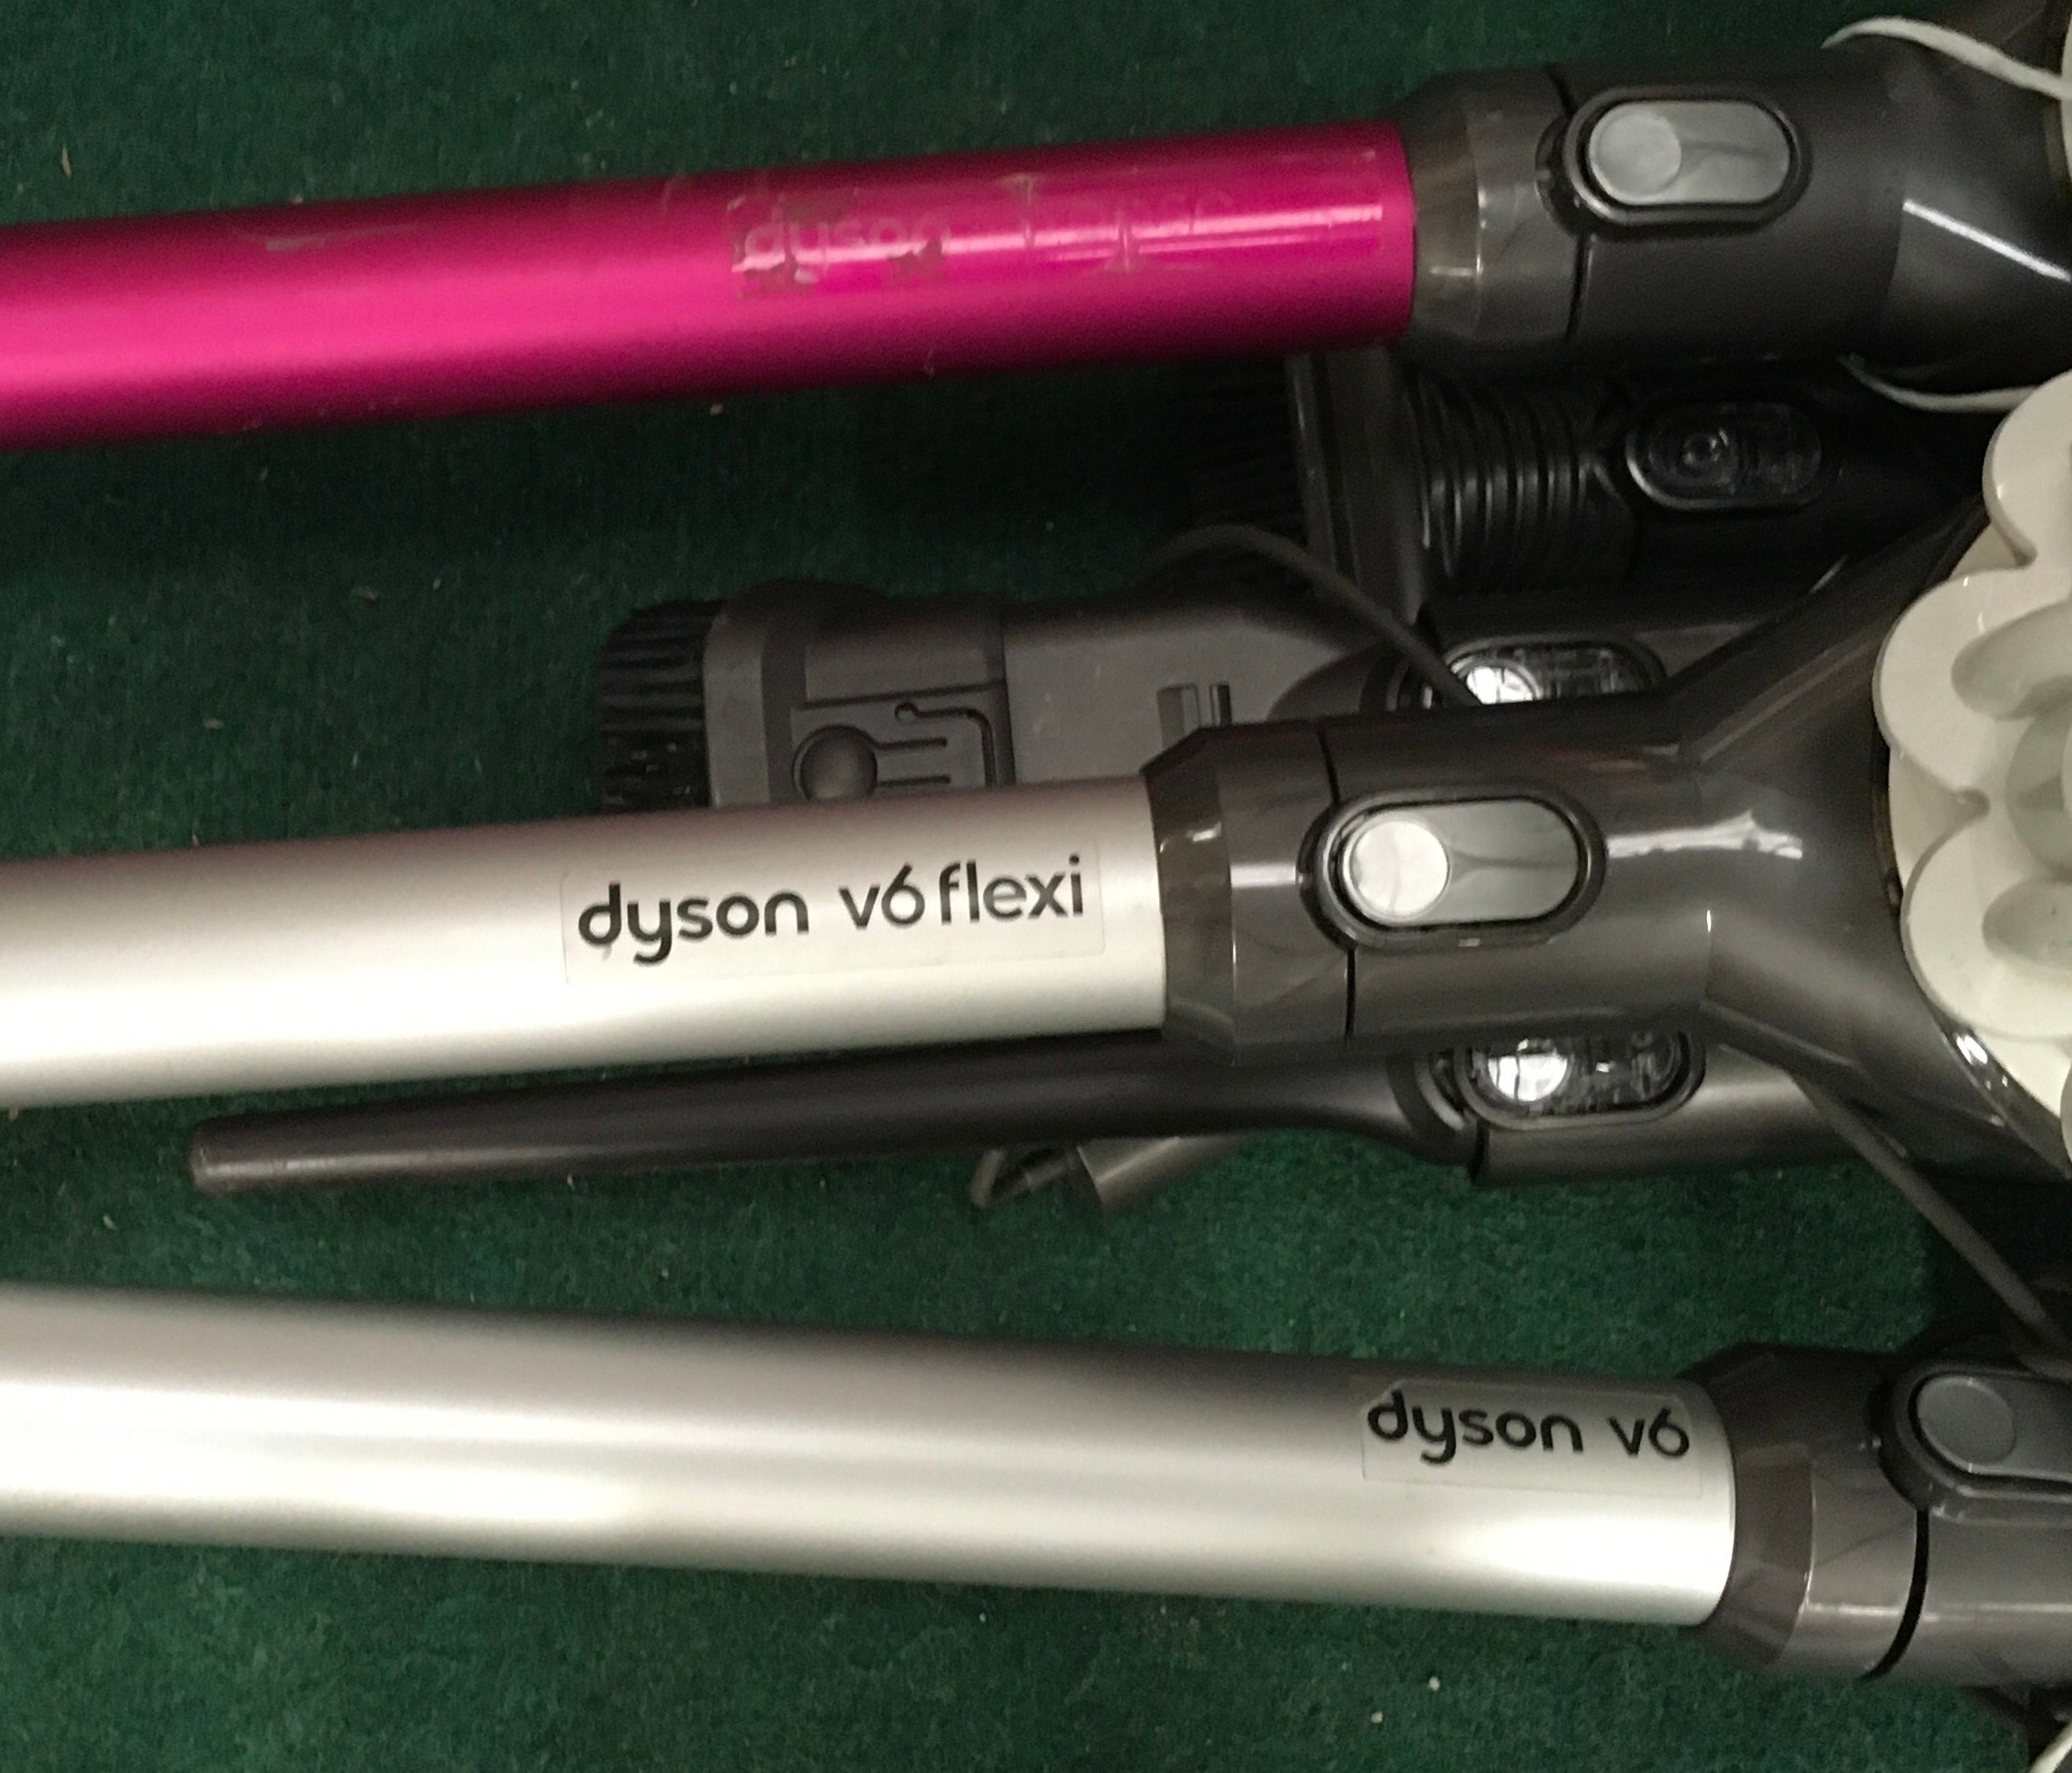 Dyson v6 cordless vacuum cleaner together with Dyson v6 flexi and v6 absolute vacuum cleaner (wp). - Image 2 of 2